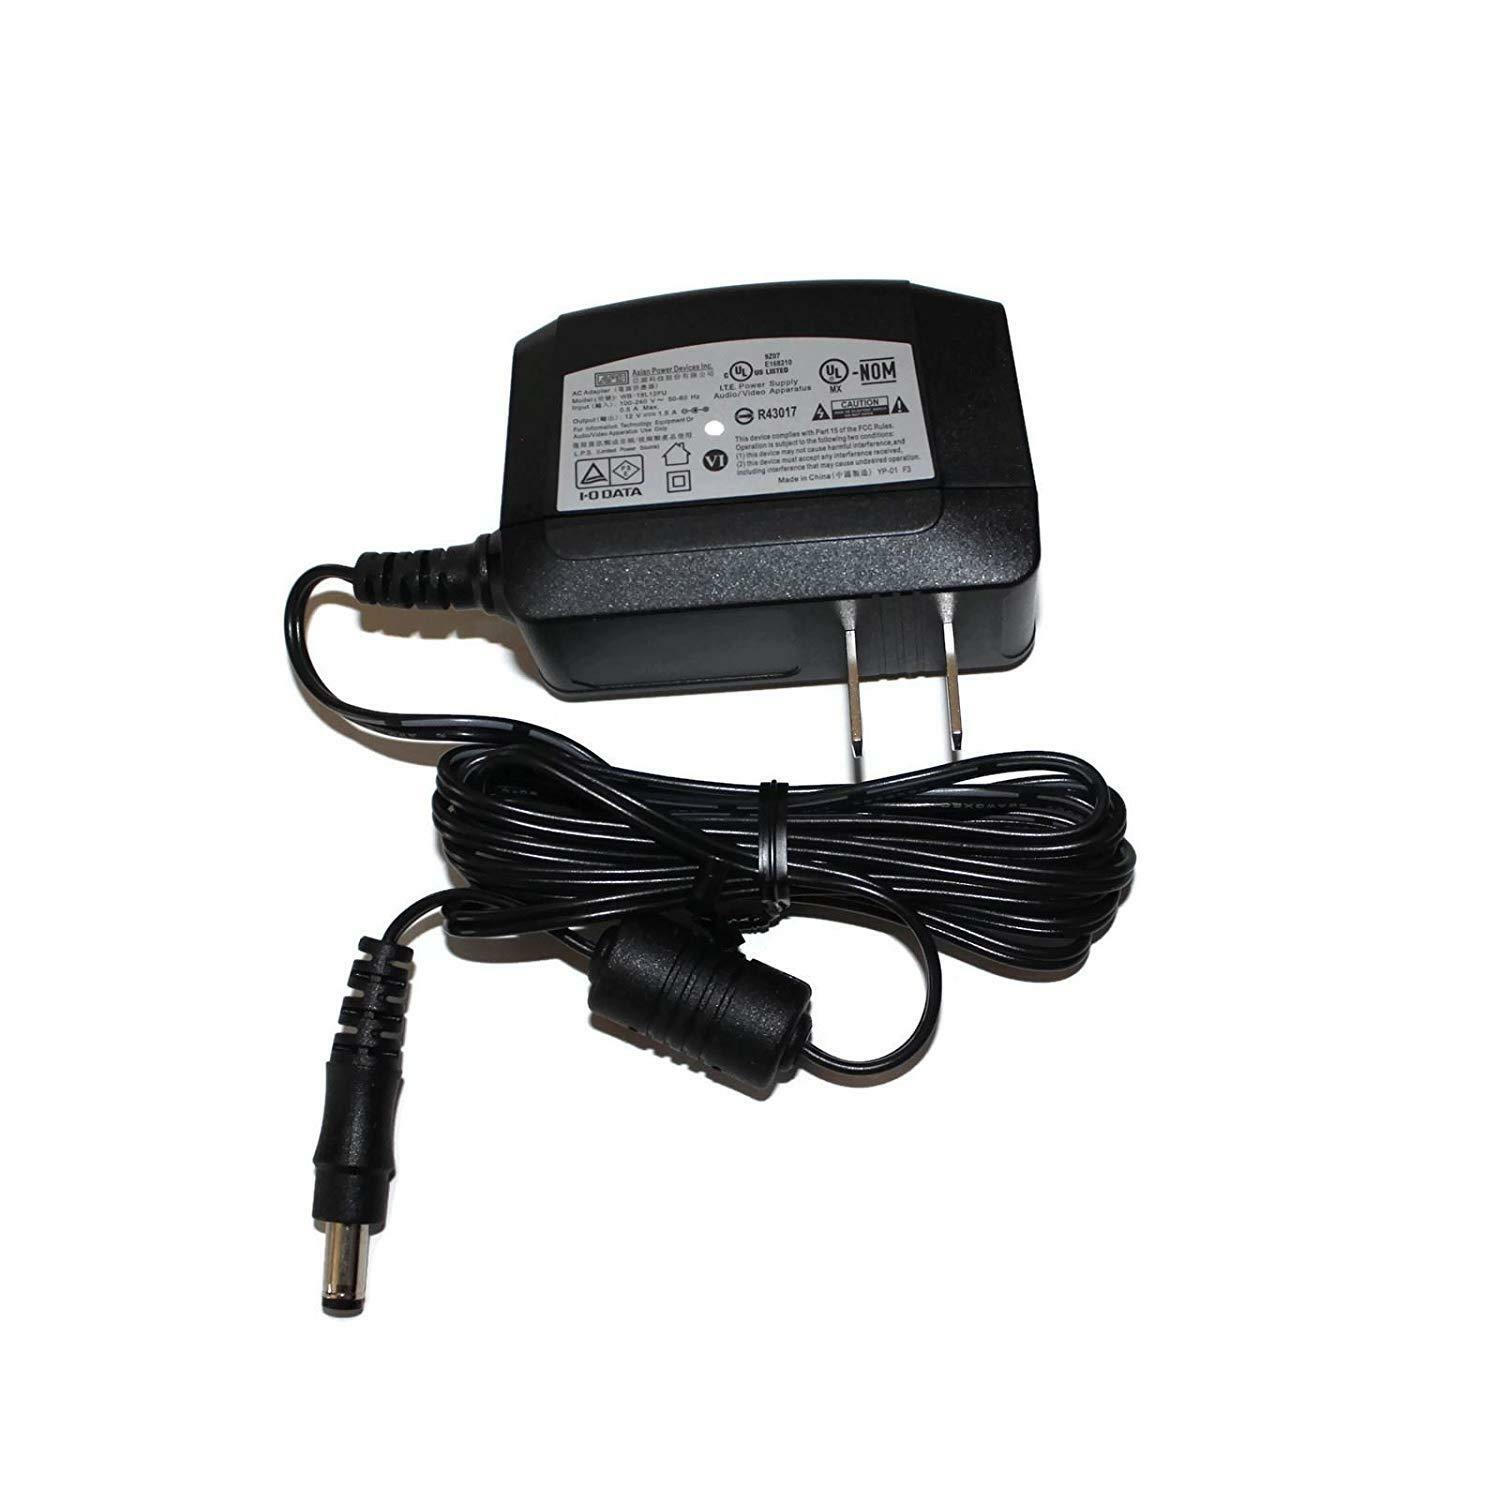 12V 1.5A APD AC Adapter 120-240V 50-60Hz for WD/Seagate HDD WB-18L12FU Model: WB-18L12FU Type: AC/DC Adapter Brand